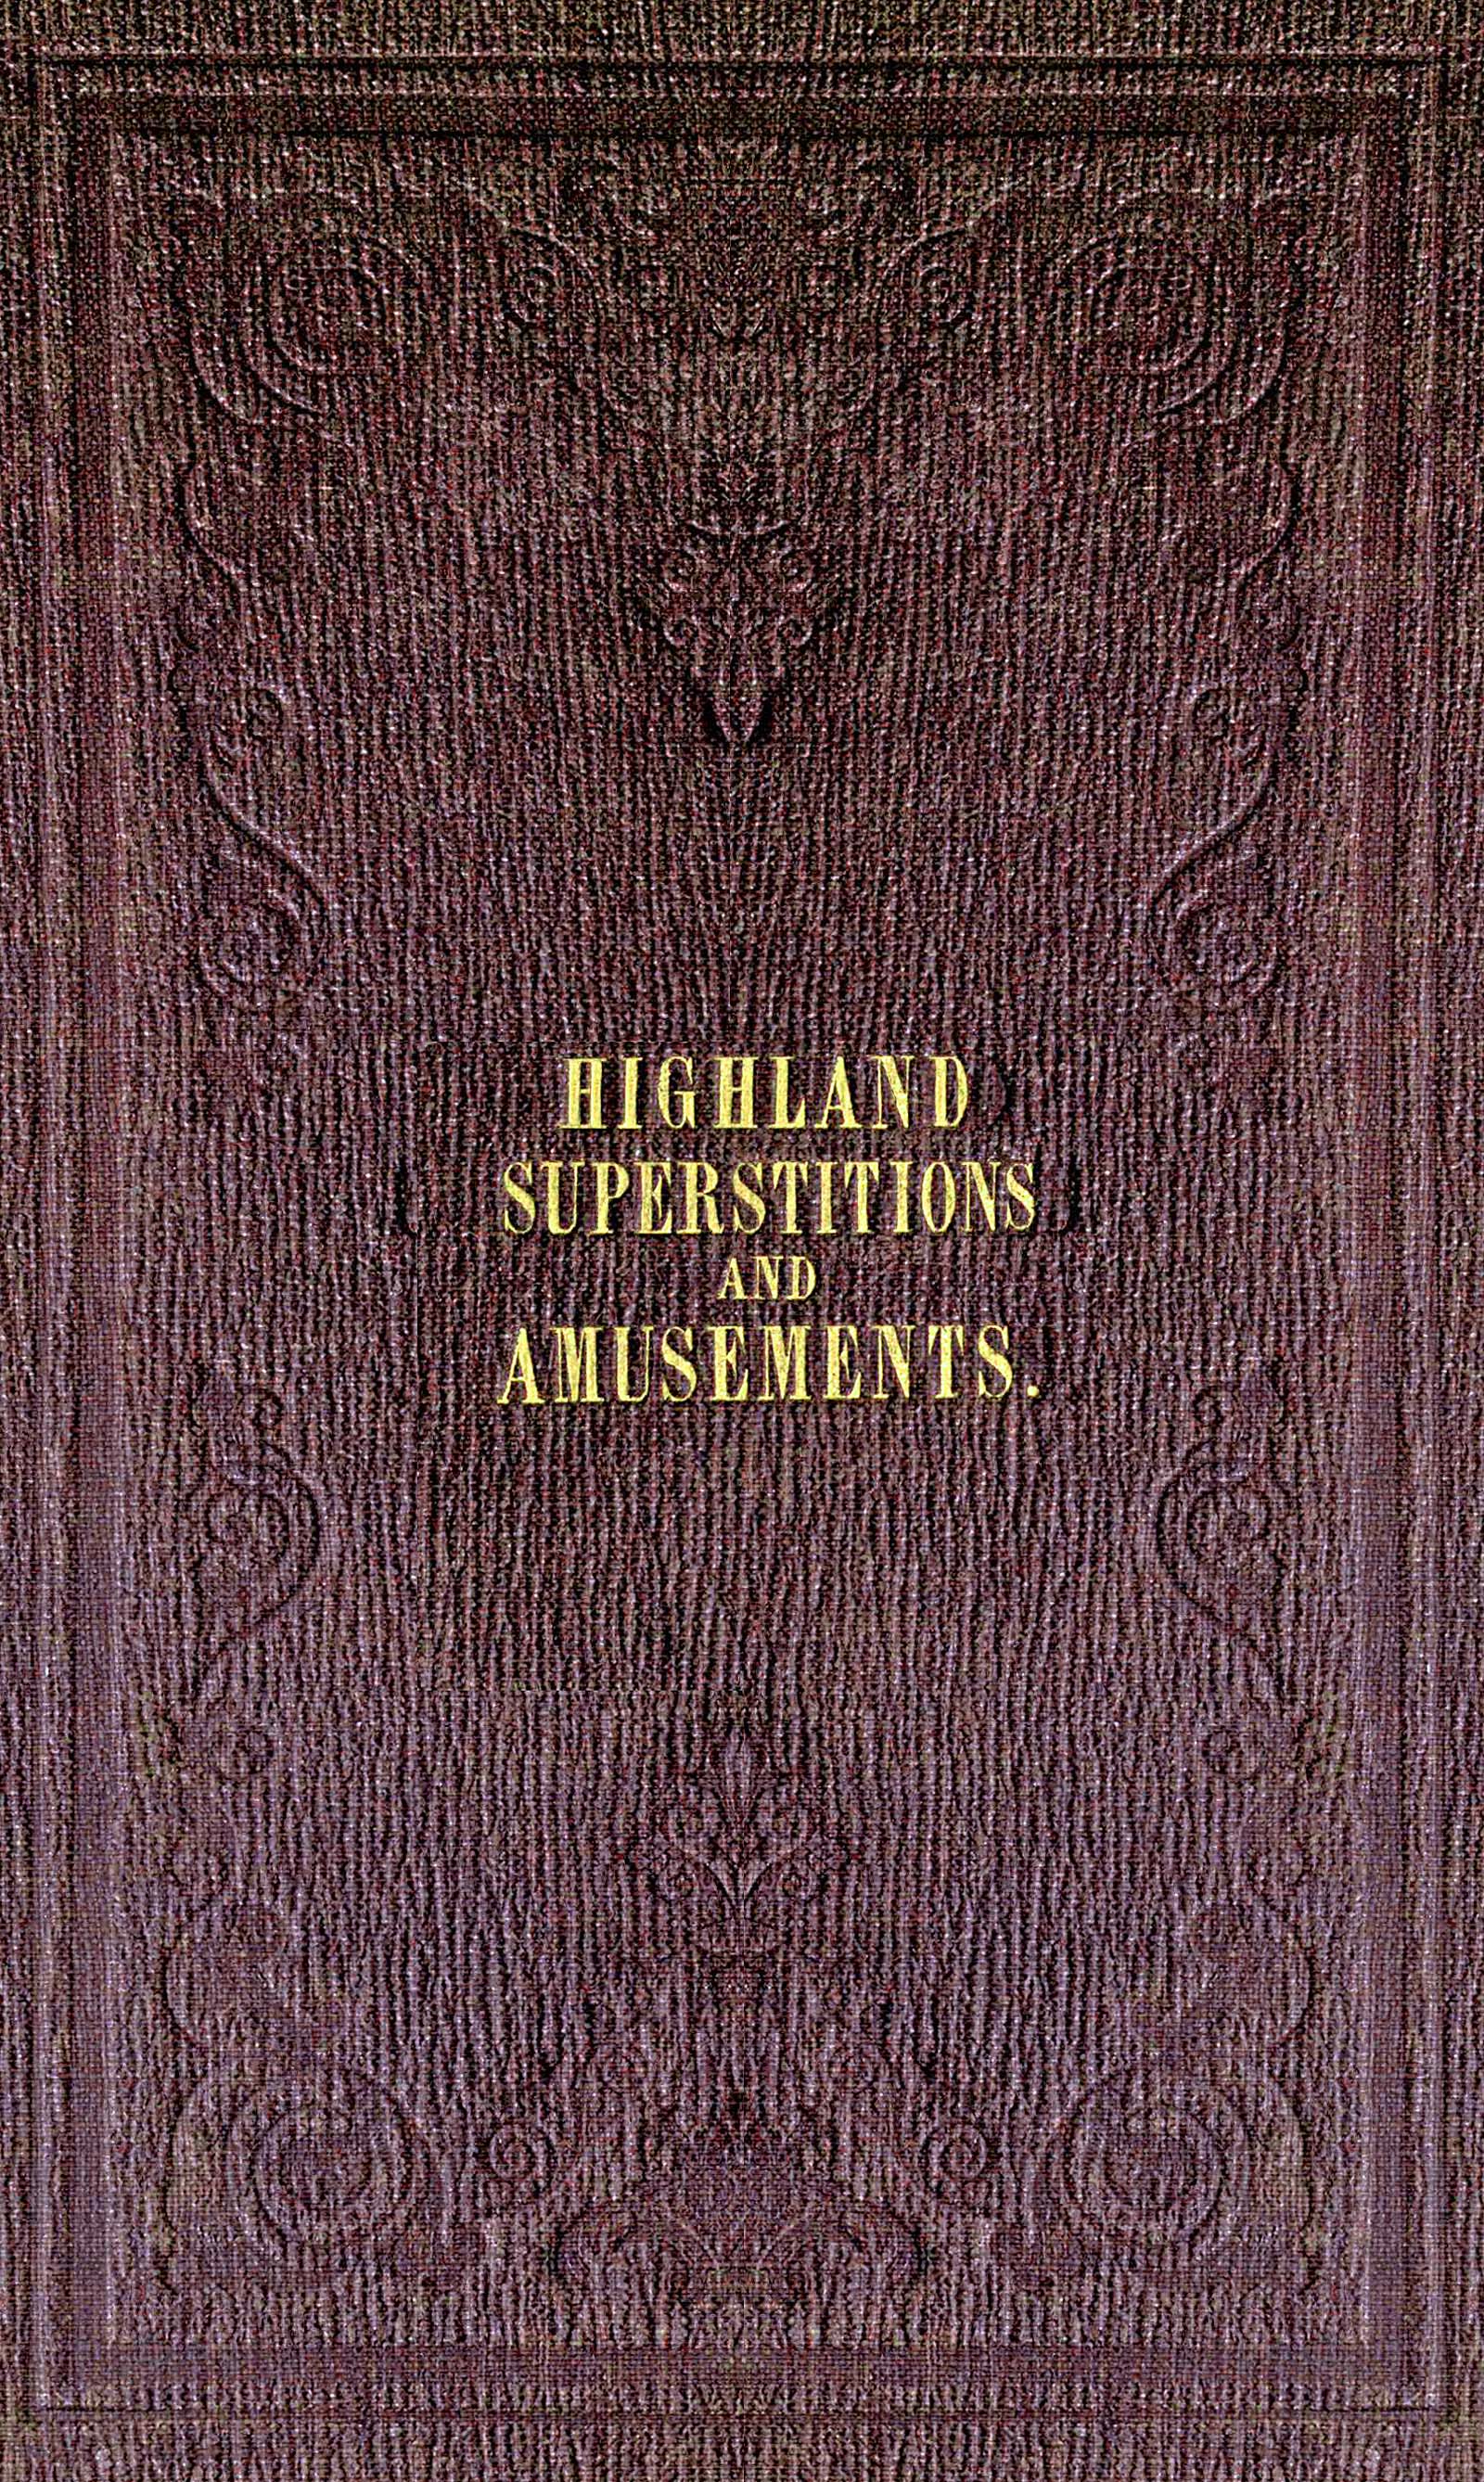 The popular superstitions and festive amusements of the Highlanders of Scotland, by William Grant Stewart—A Project Gutenberg eBook image